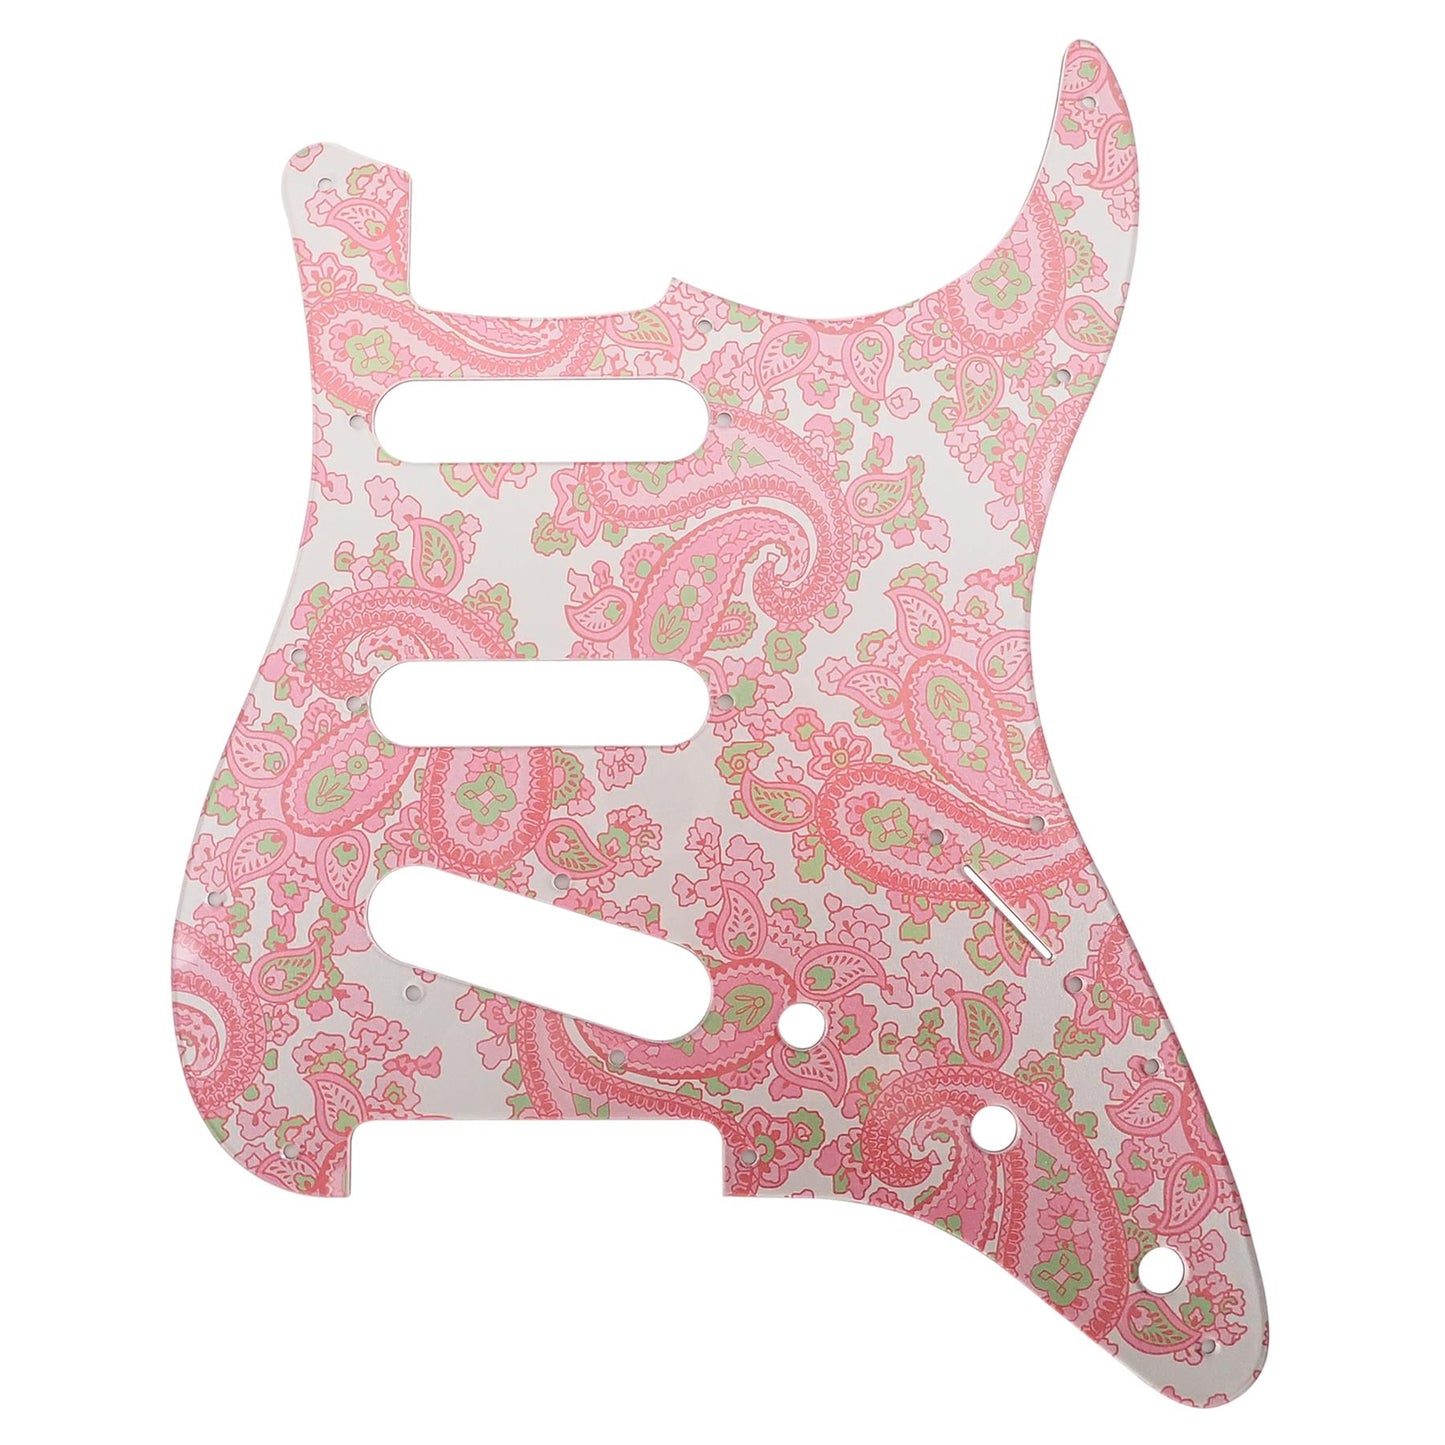 Luthitec Silver Backed Pink Paisley Acrylic Stratocaster 11 Hole Guitar Pickguard